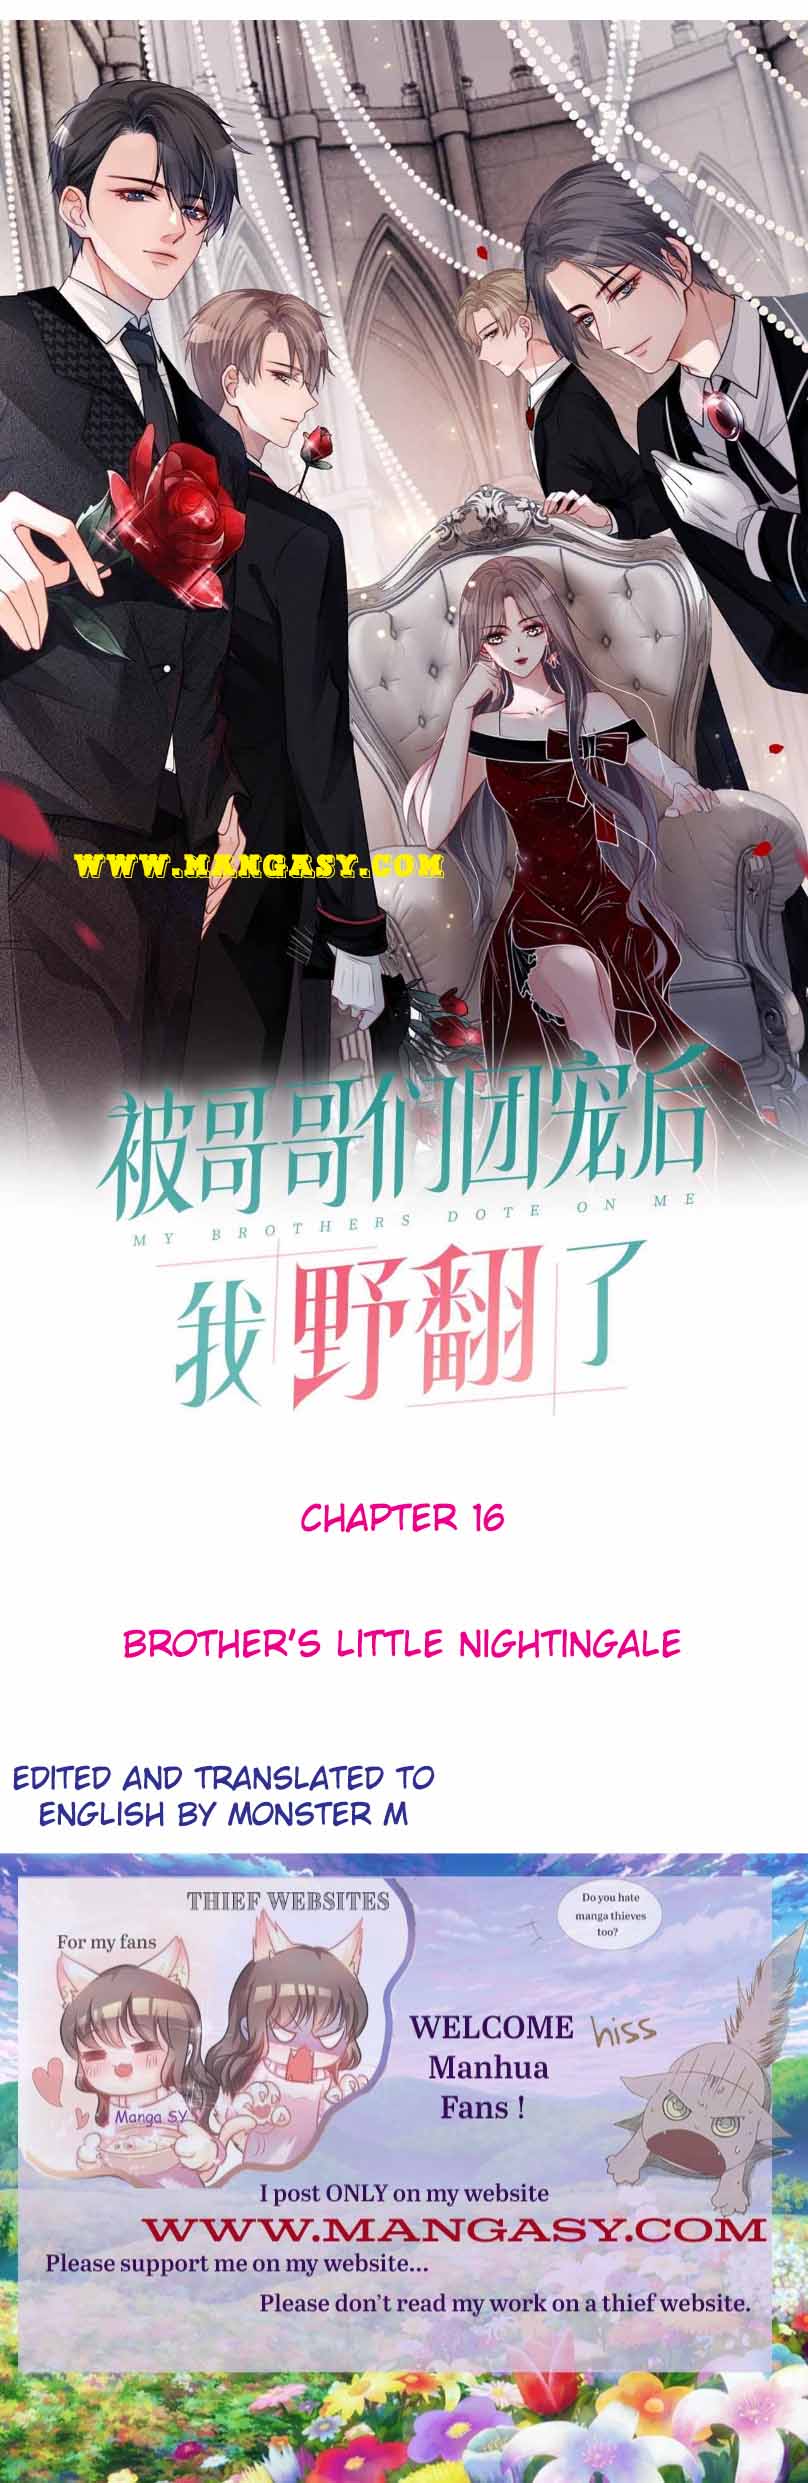 My Brothers Dote On Me chapter 16